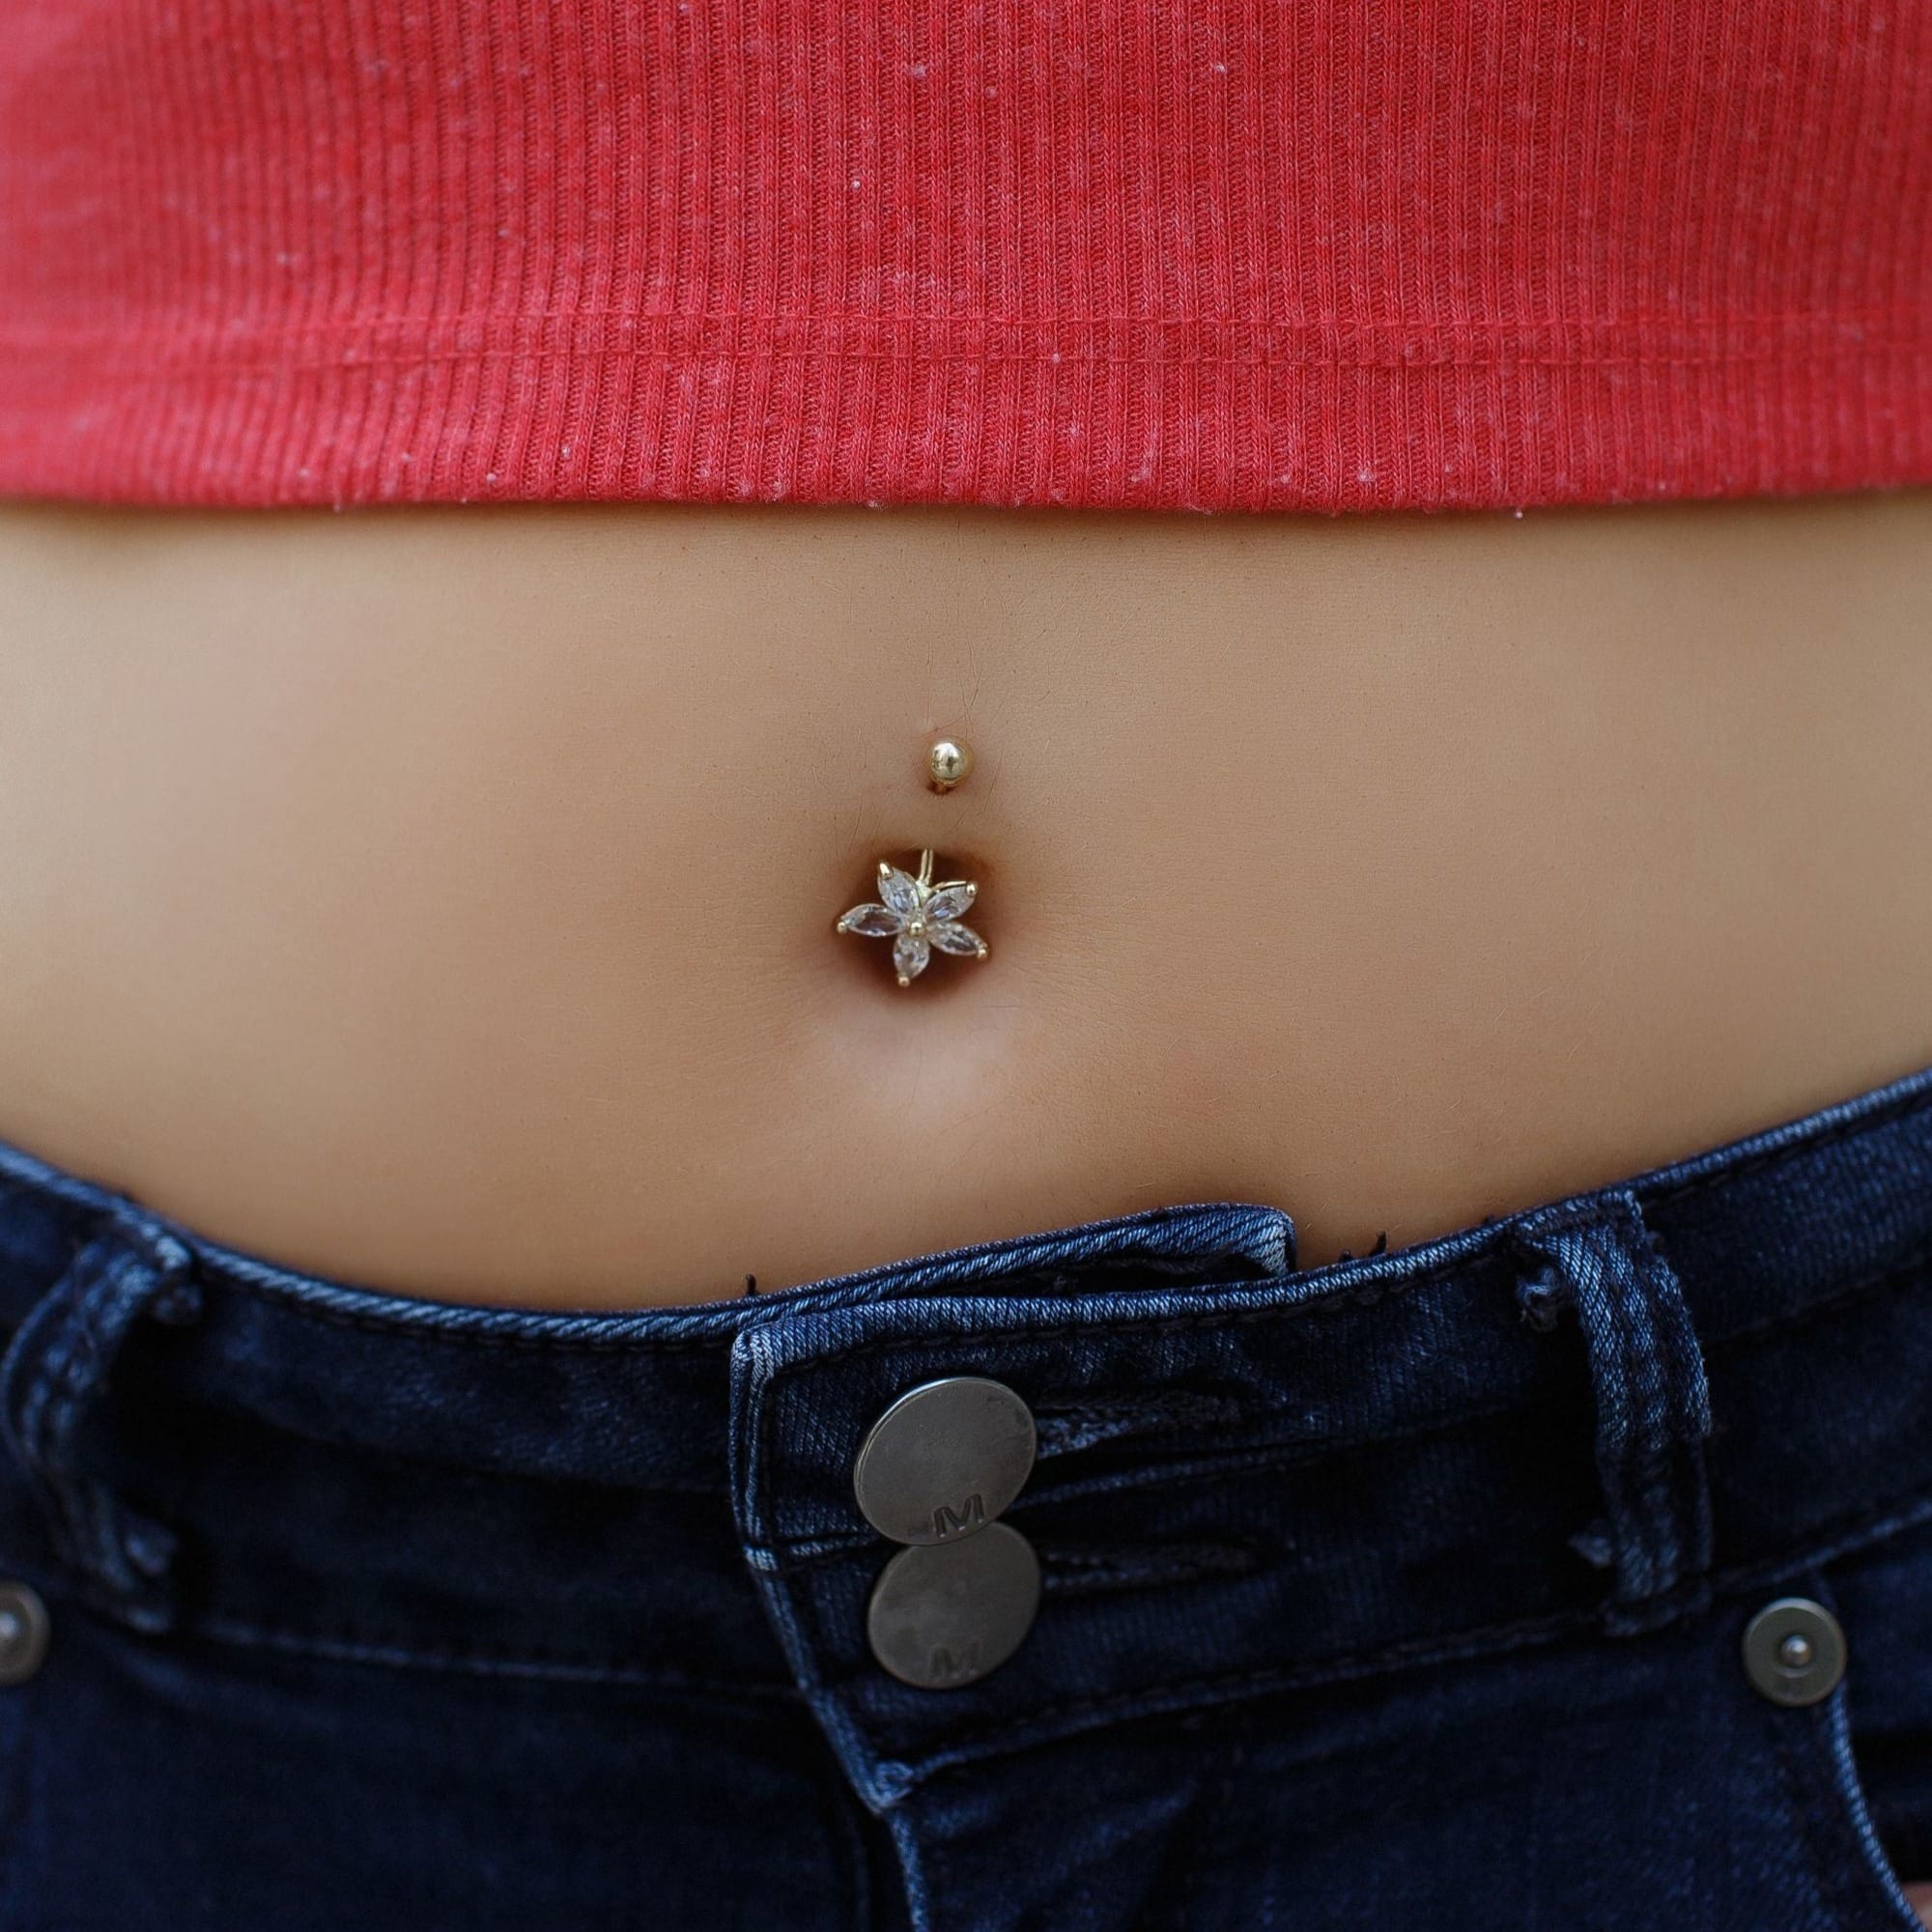 Titanium 14G Crystal Belly Ring | Claire's US